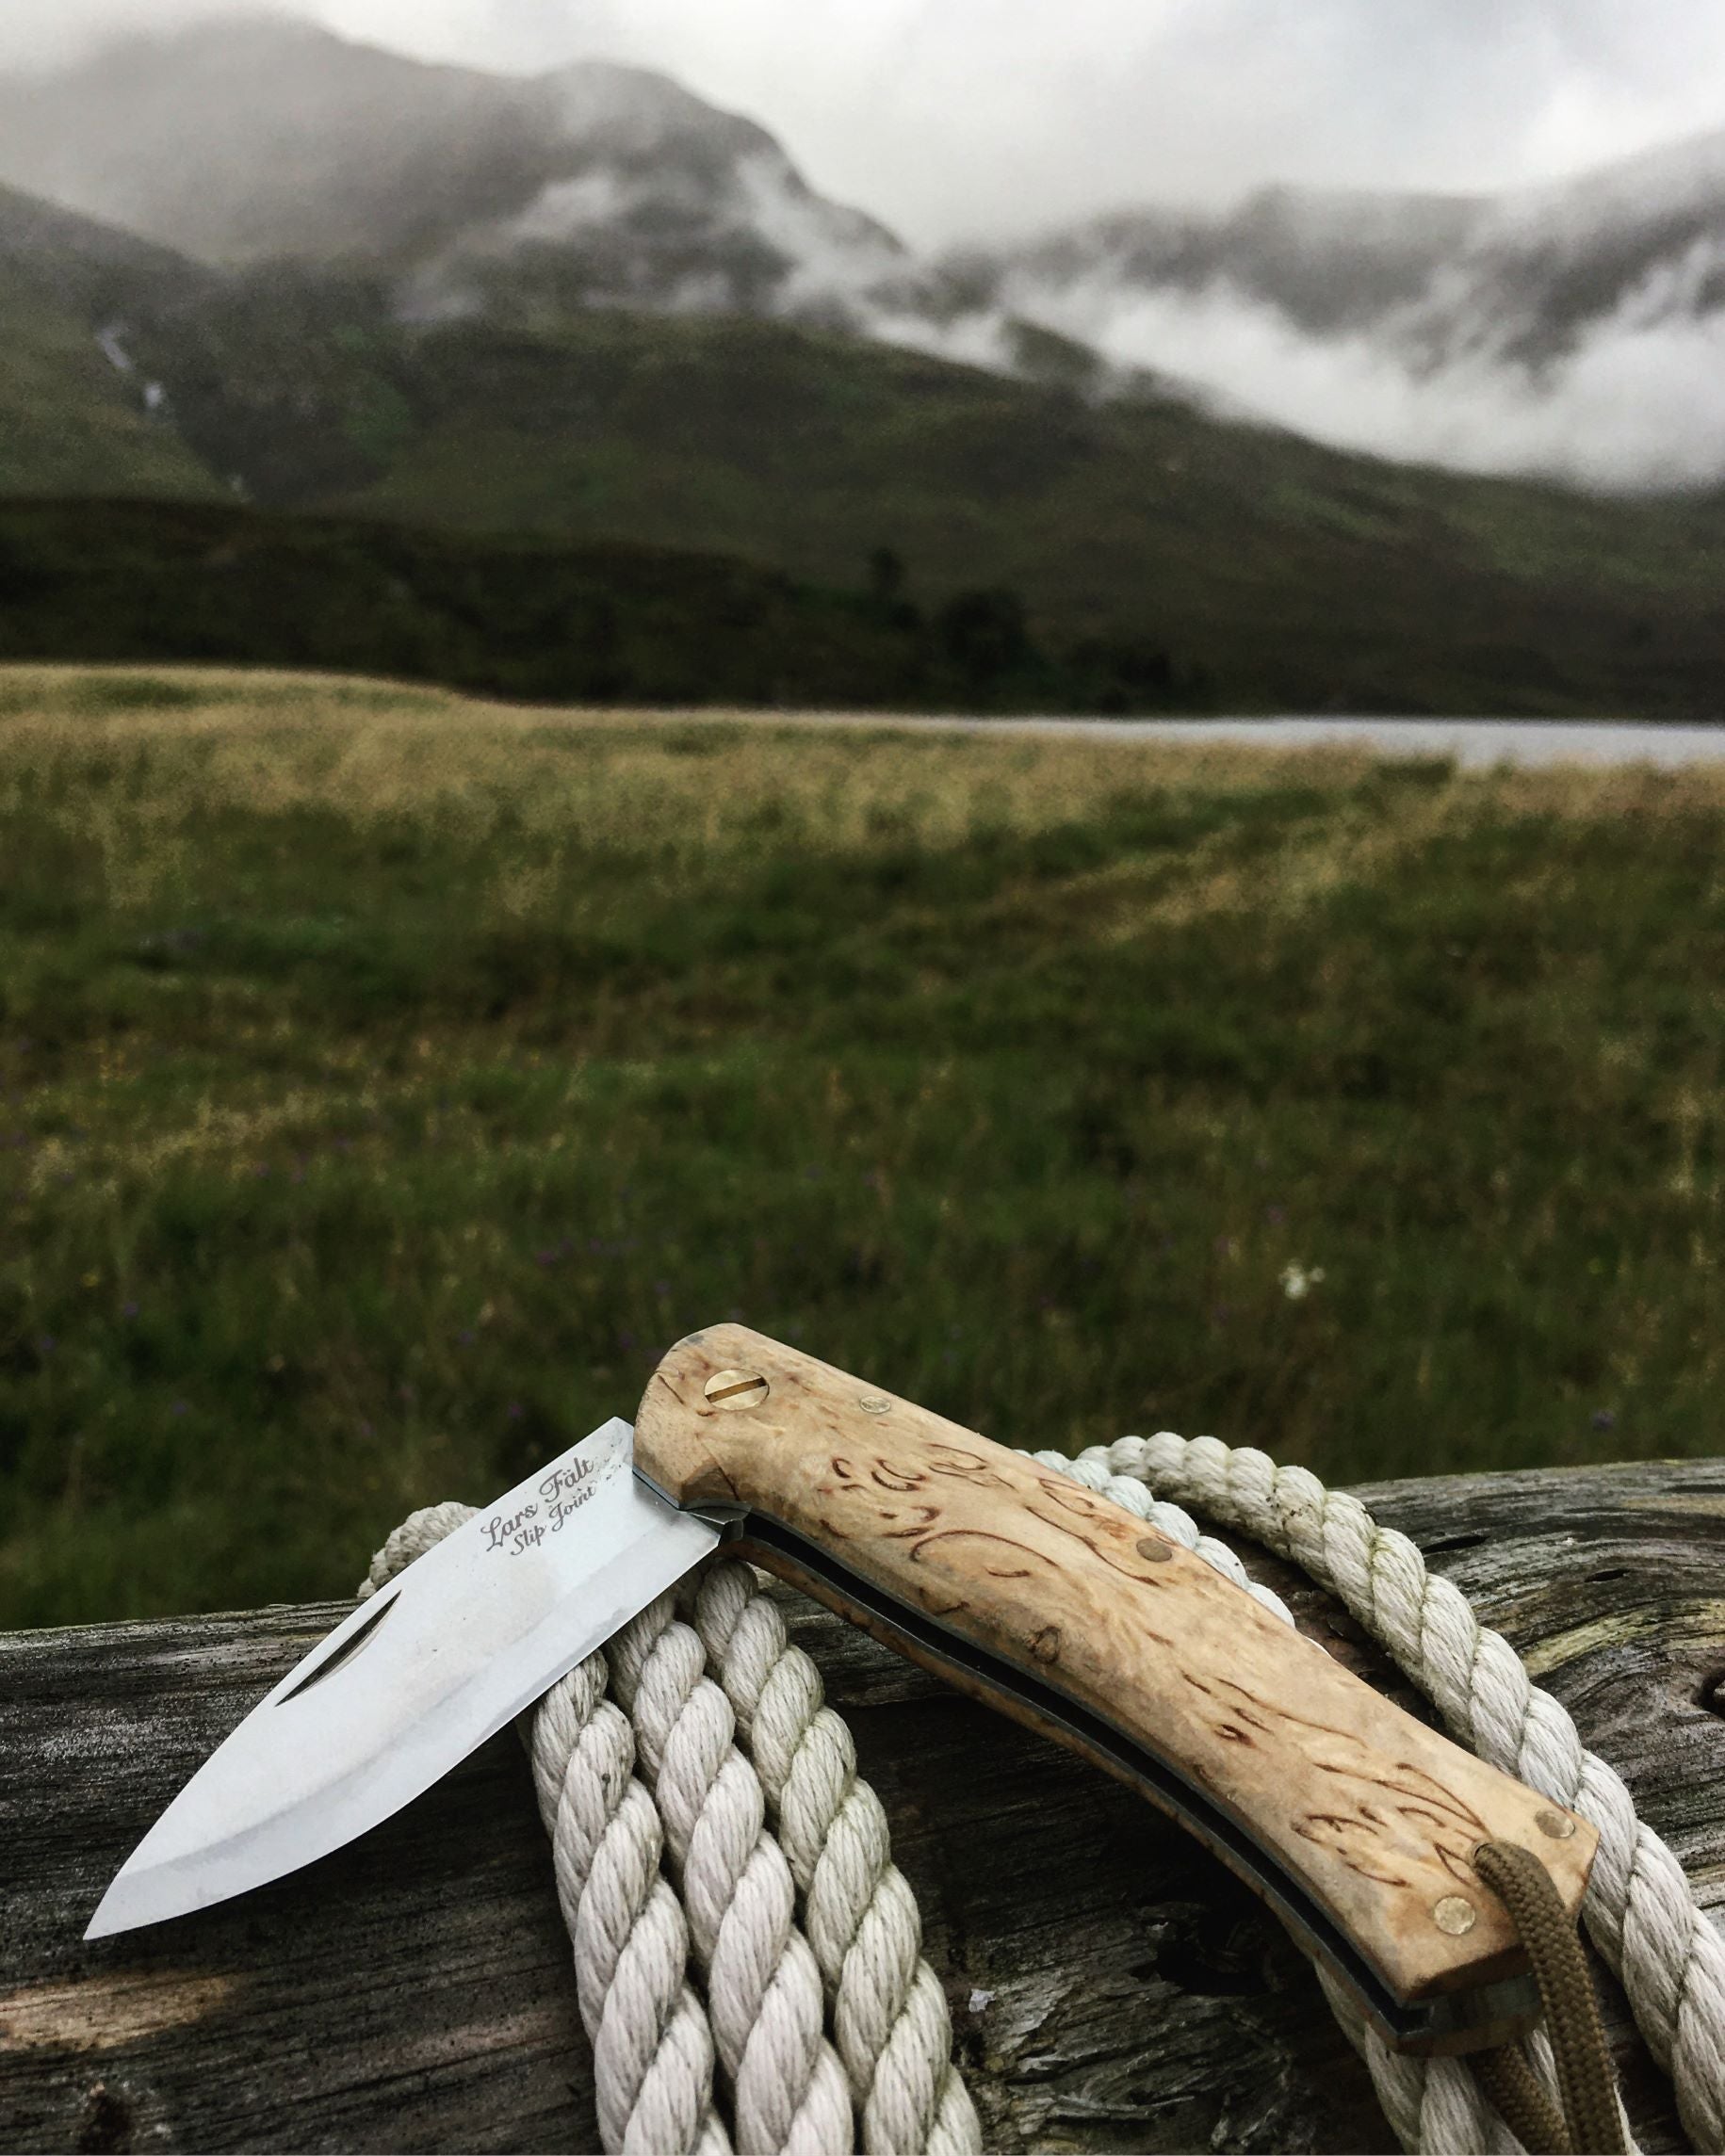 UK-legal Slip Joint folding knife, made by Casstrom Sweden. Knife is laid on a log in the foreground and has hills in the background